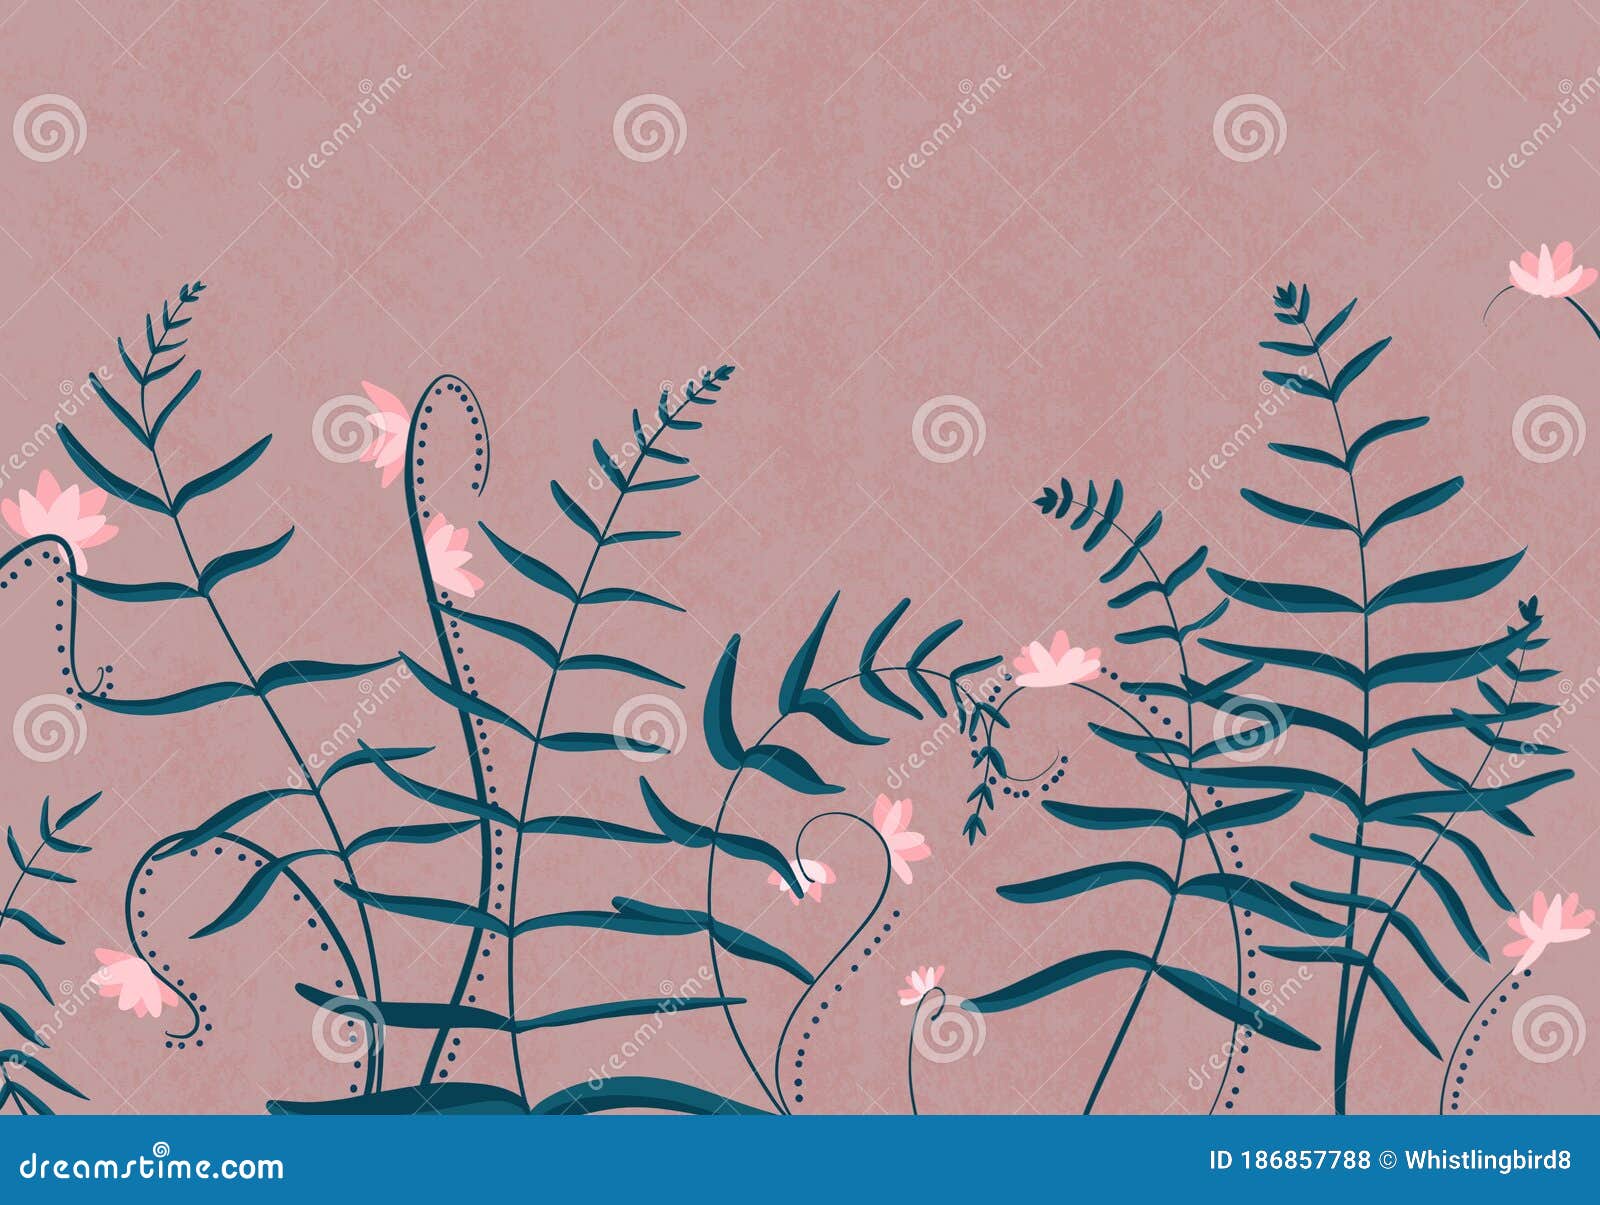 Nature Drawing Silhouette Background  Silhouettepics